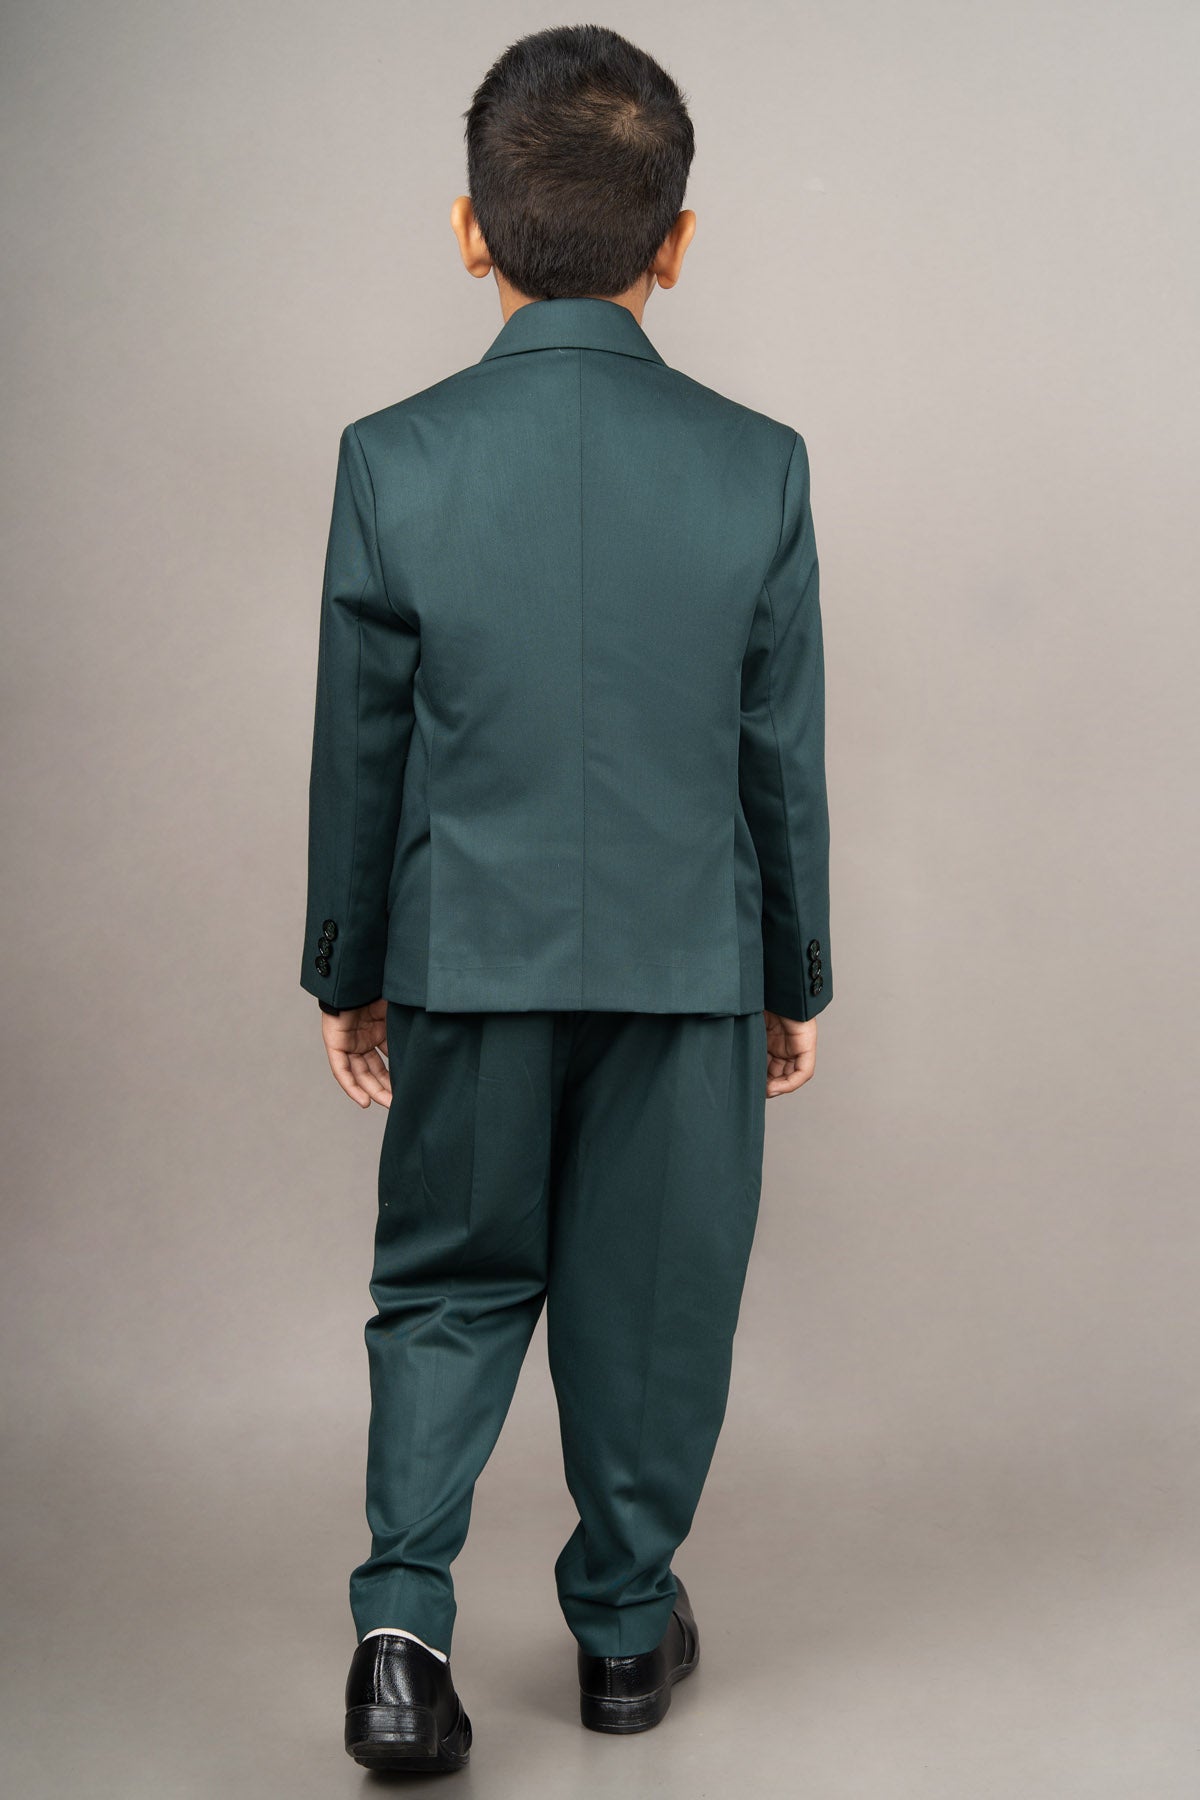 Green Lapel Embroidered Suit